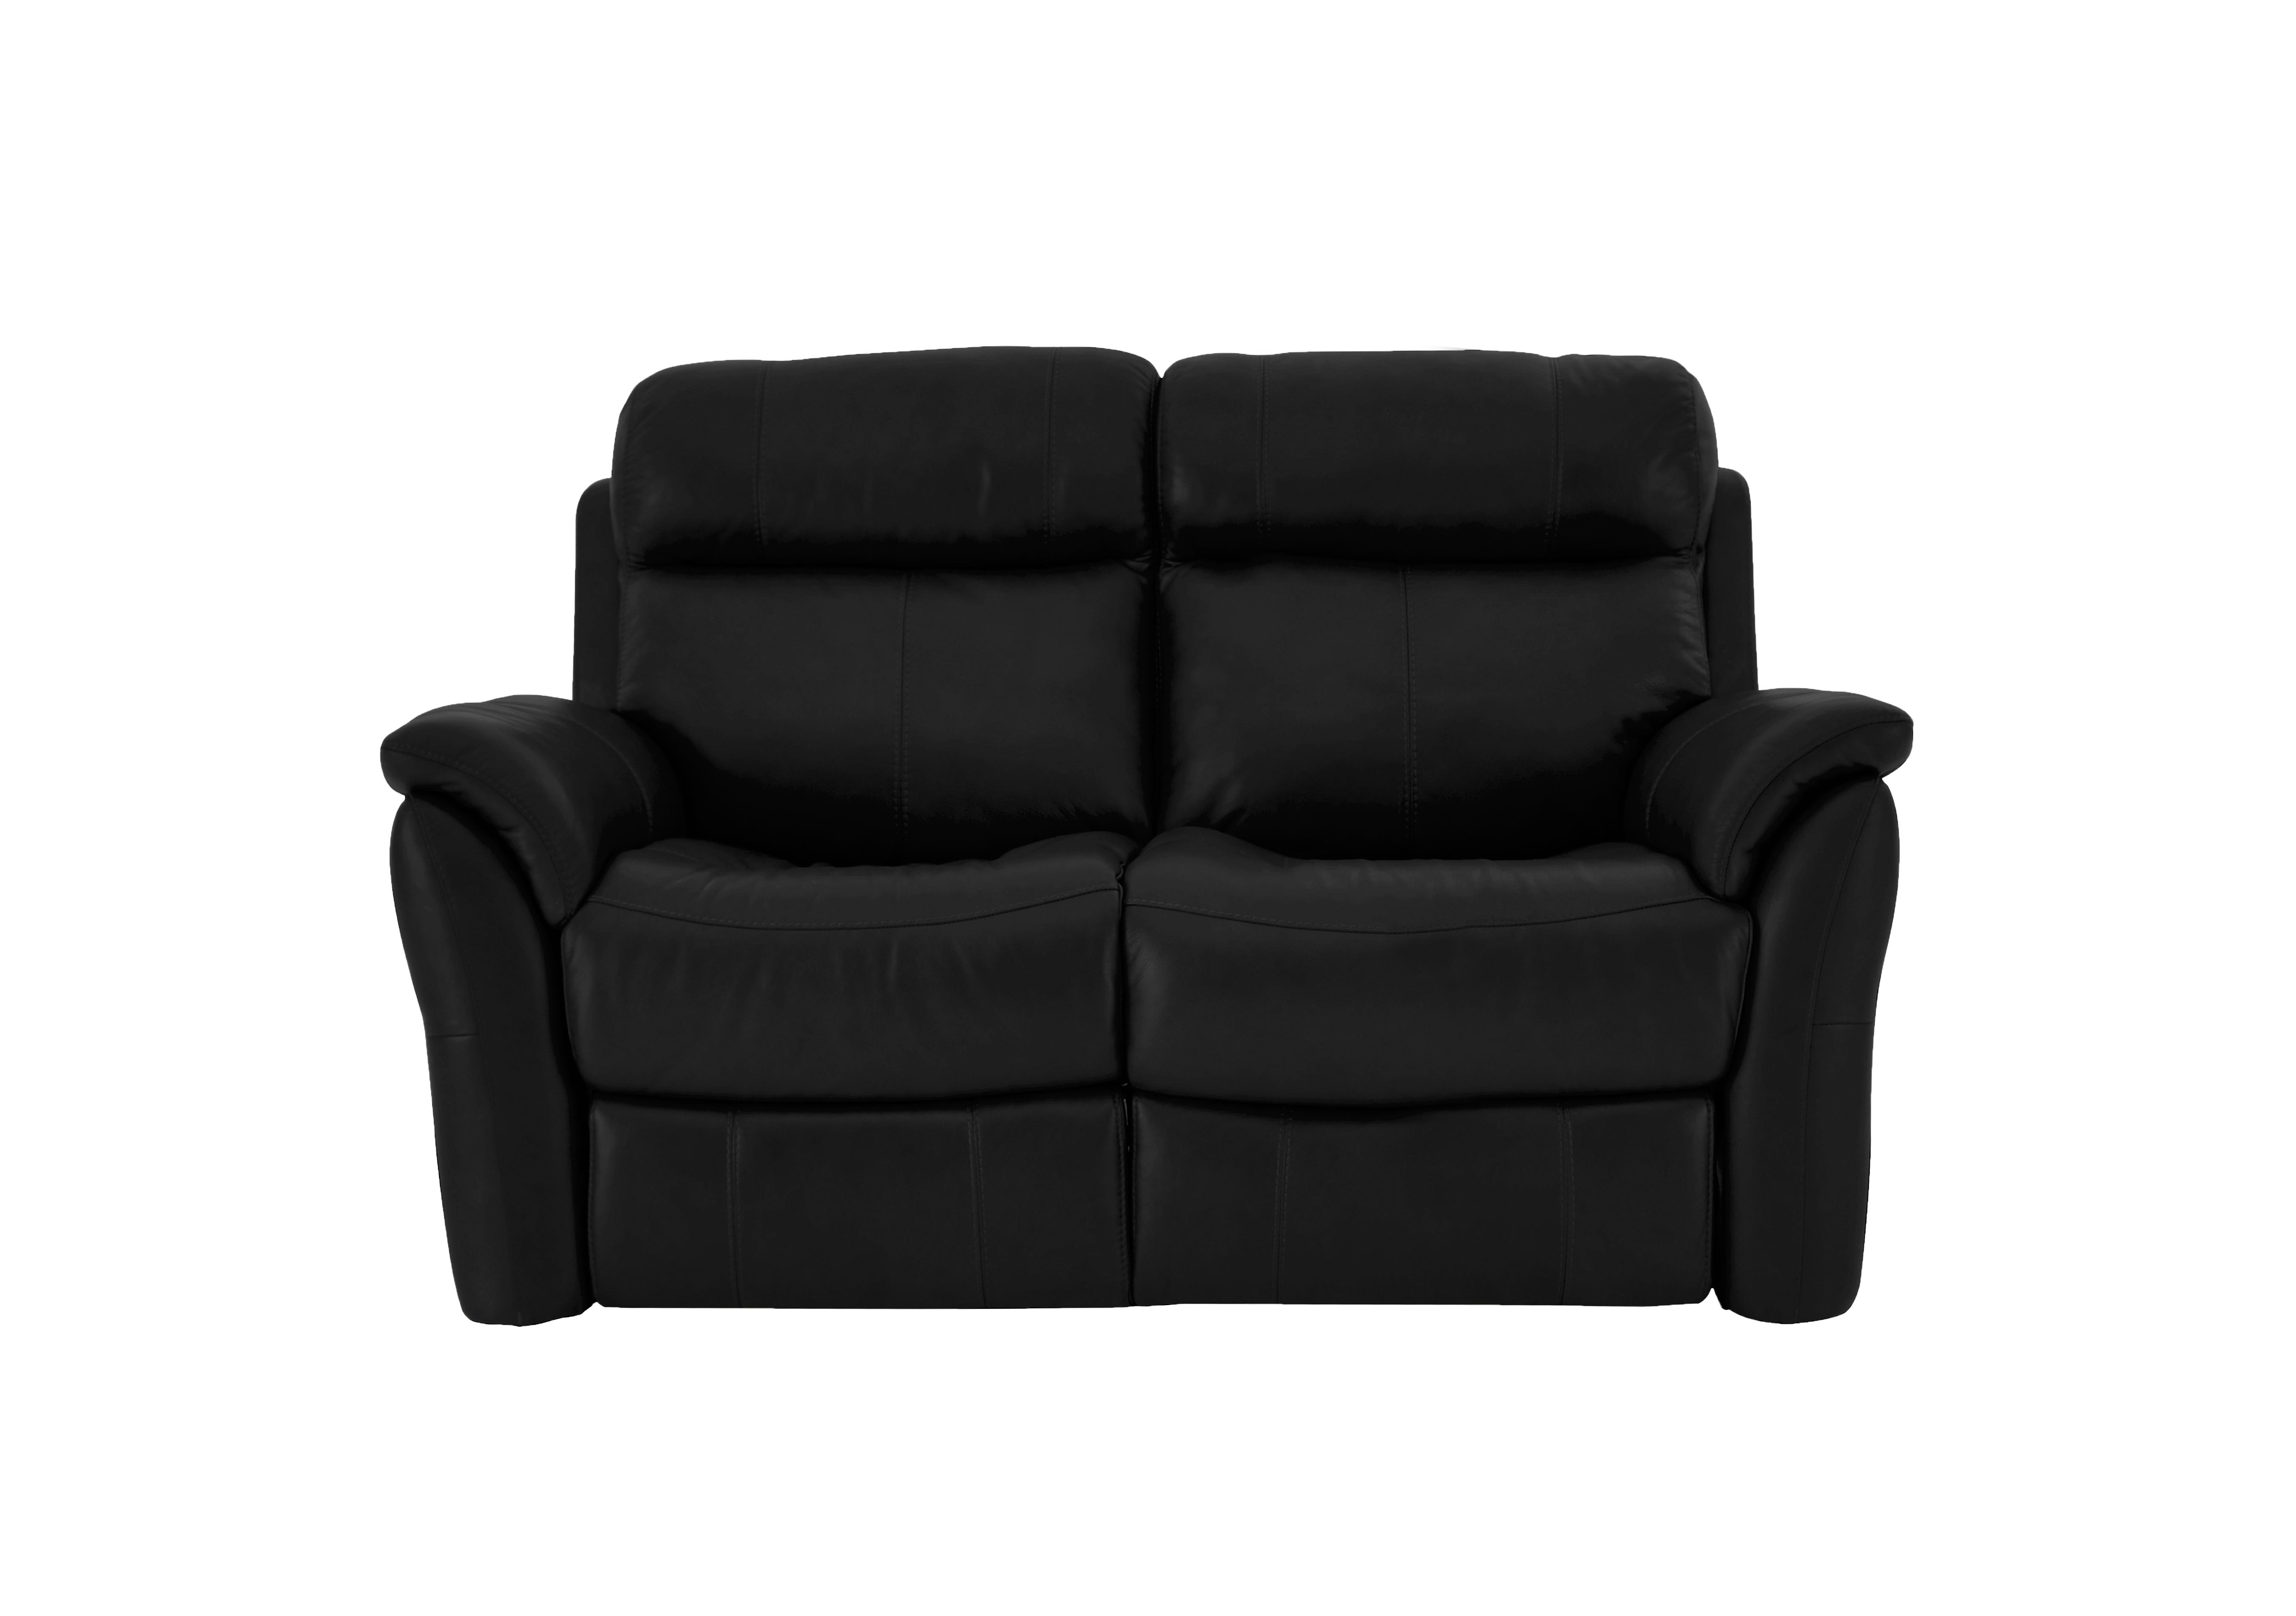 Relax Station Revive 2 Seater Leather Sofa in Bv-3500 Classic Black on Furniture Village